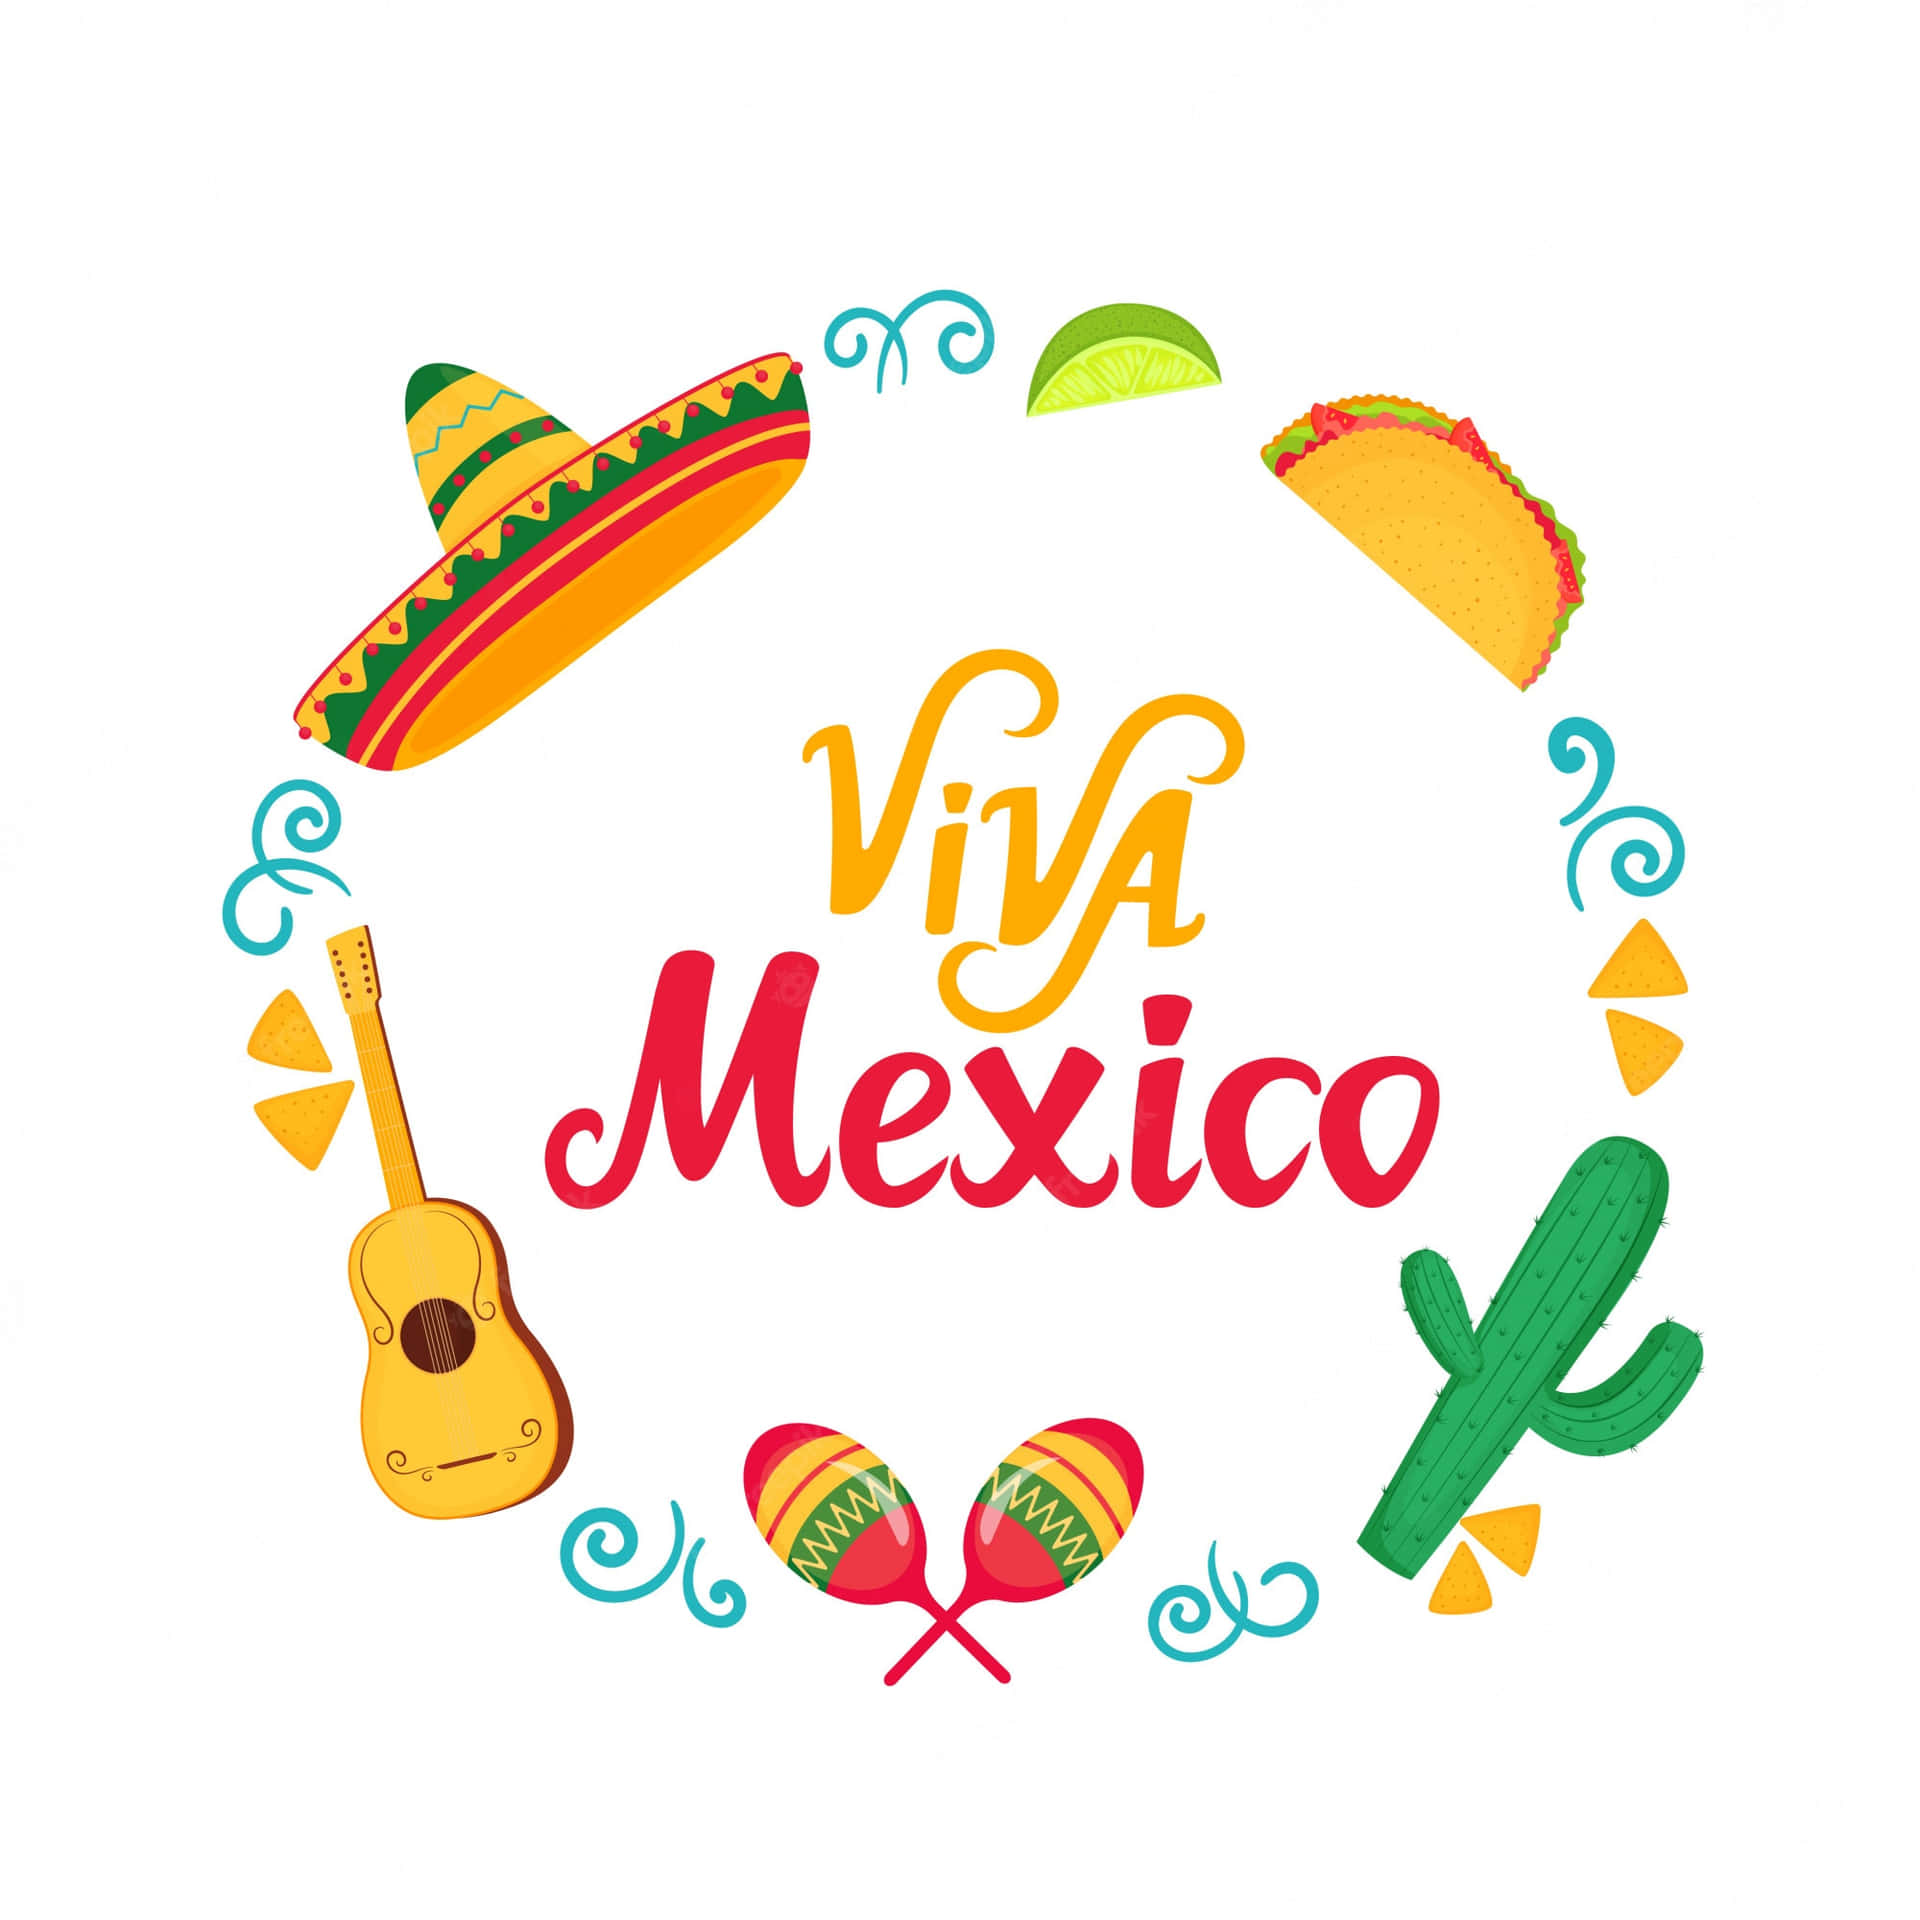 Viva Mexico - Celebrating The Culture And People Of Mexico Background